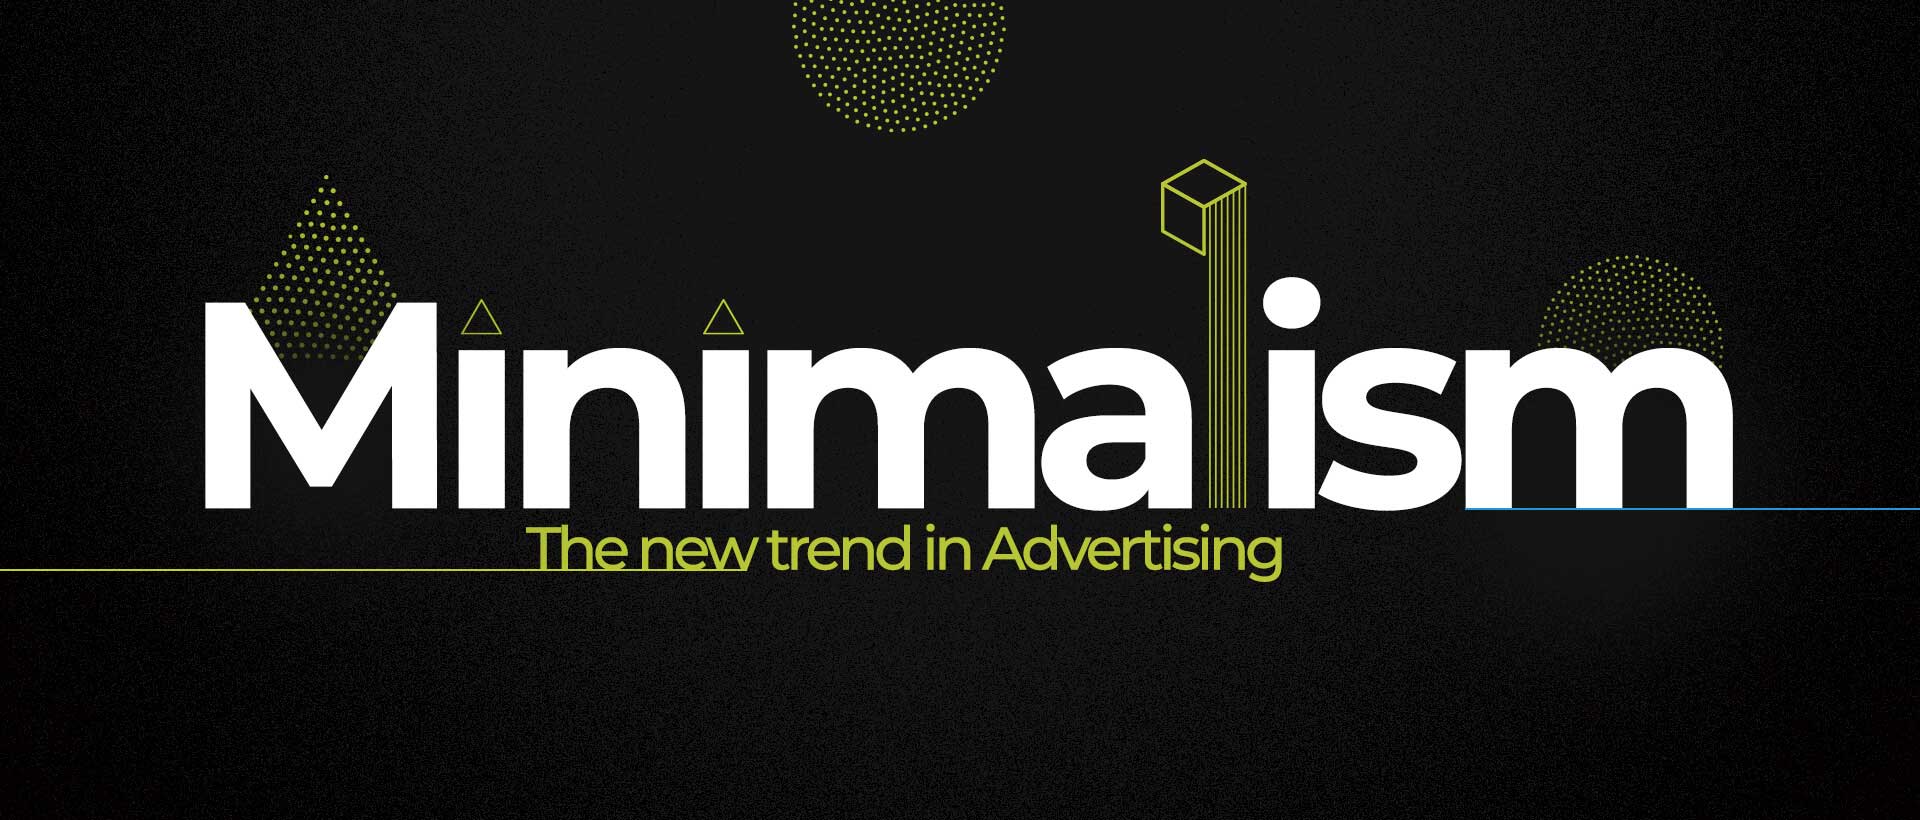 Minimalism – The new trend in Advertising